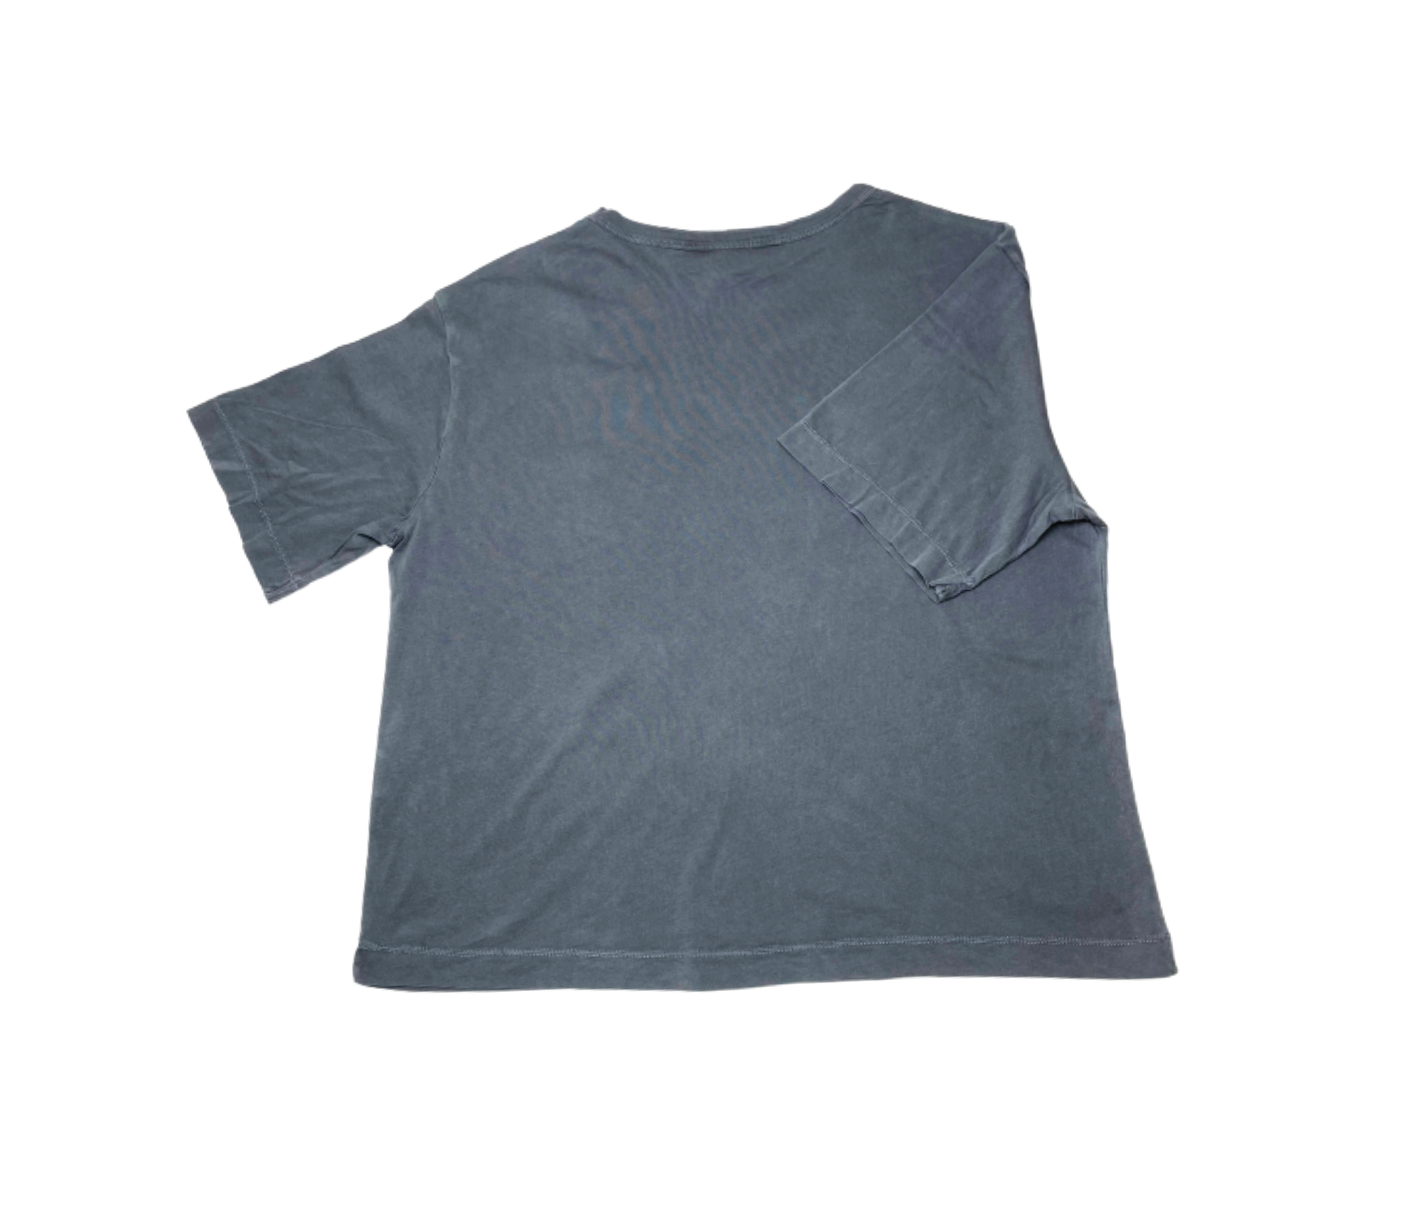 THE ANIMALS OBSERVATORY - T-shirt gris - 8 ans